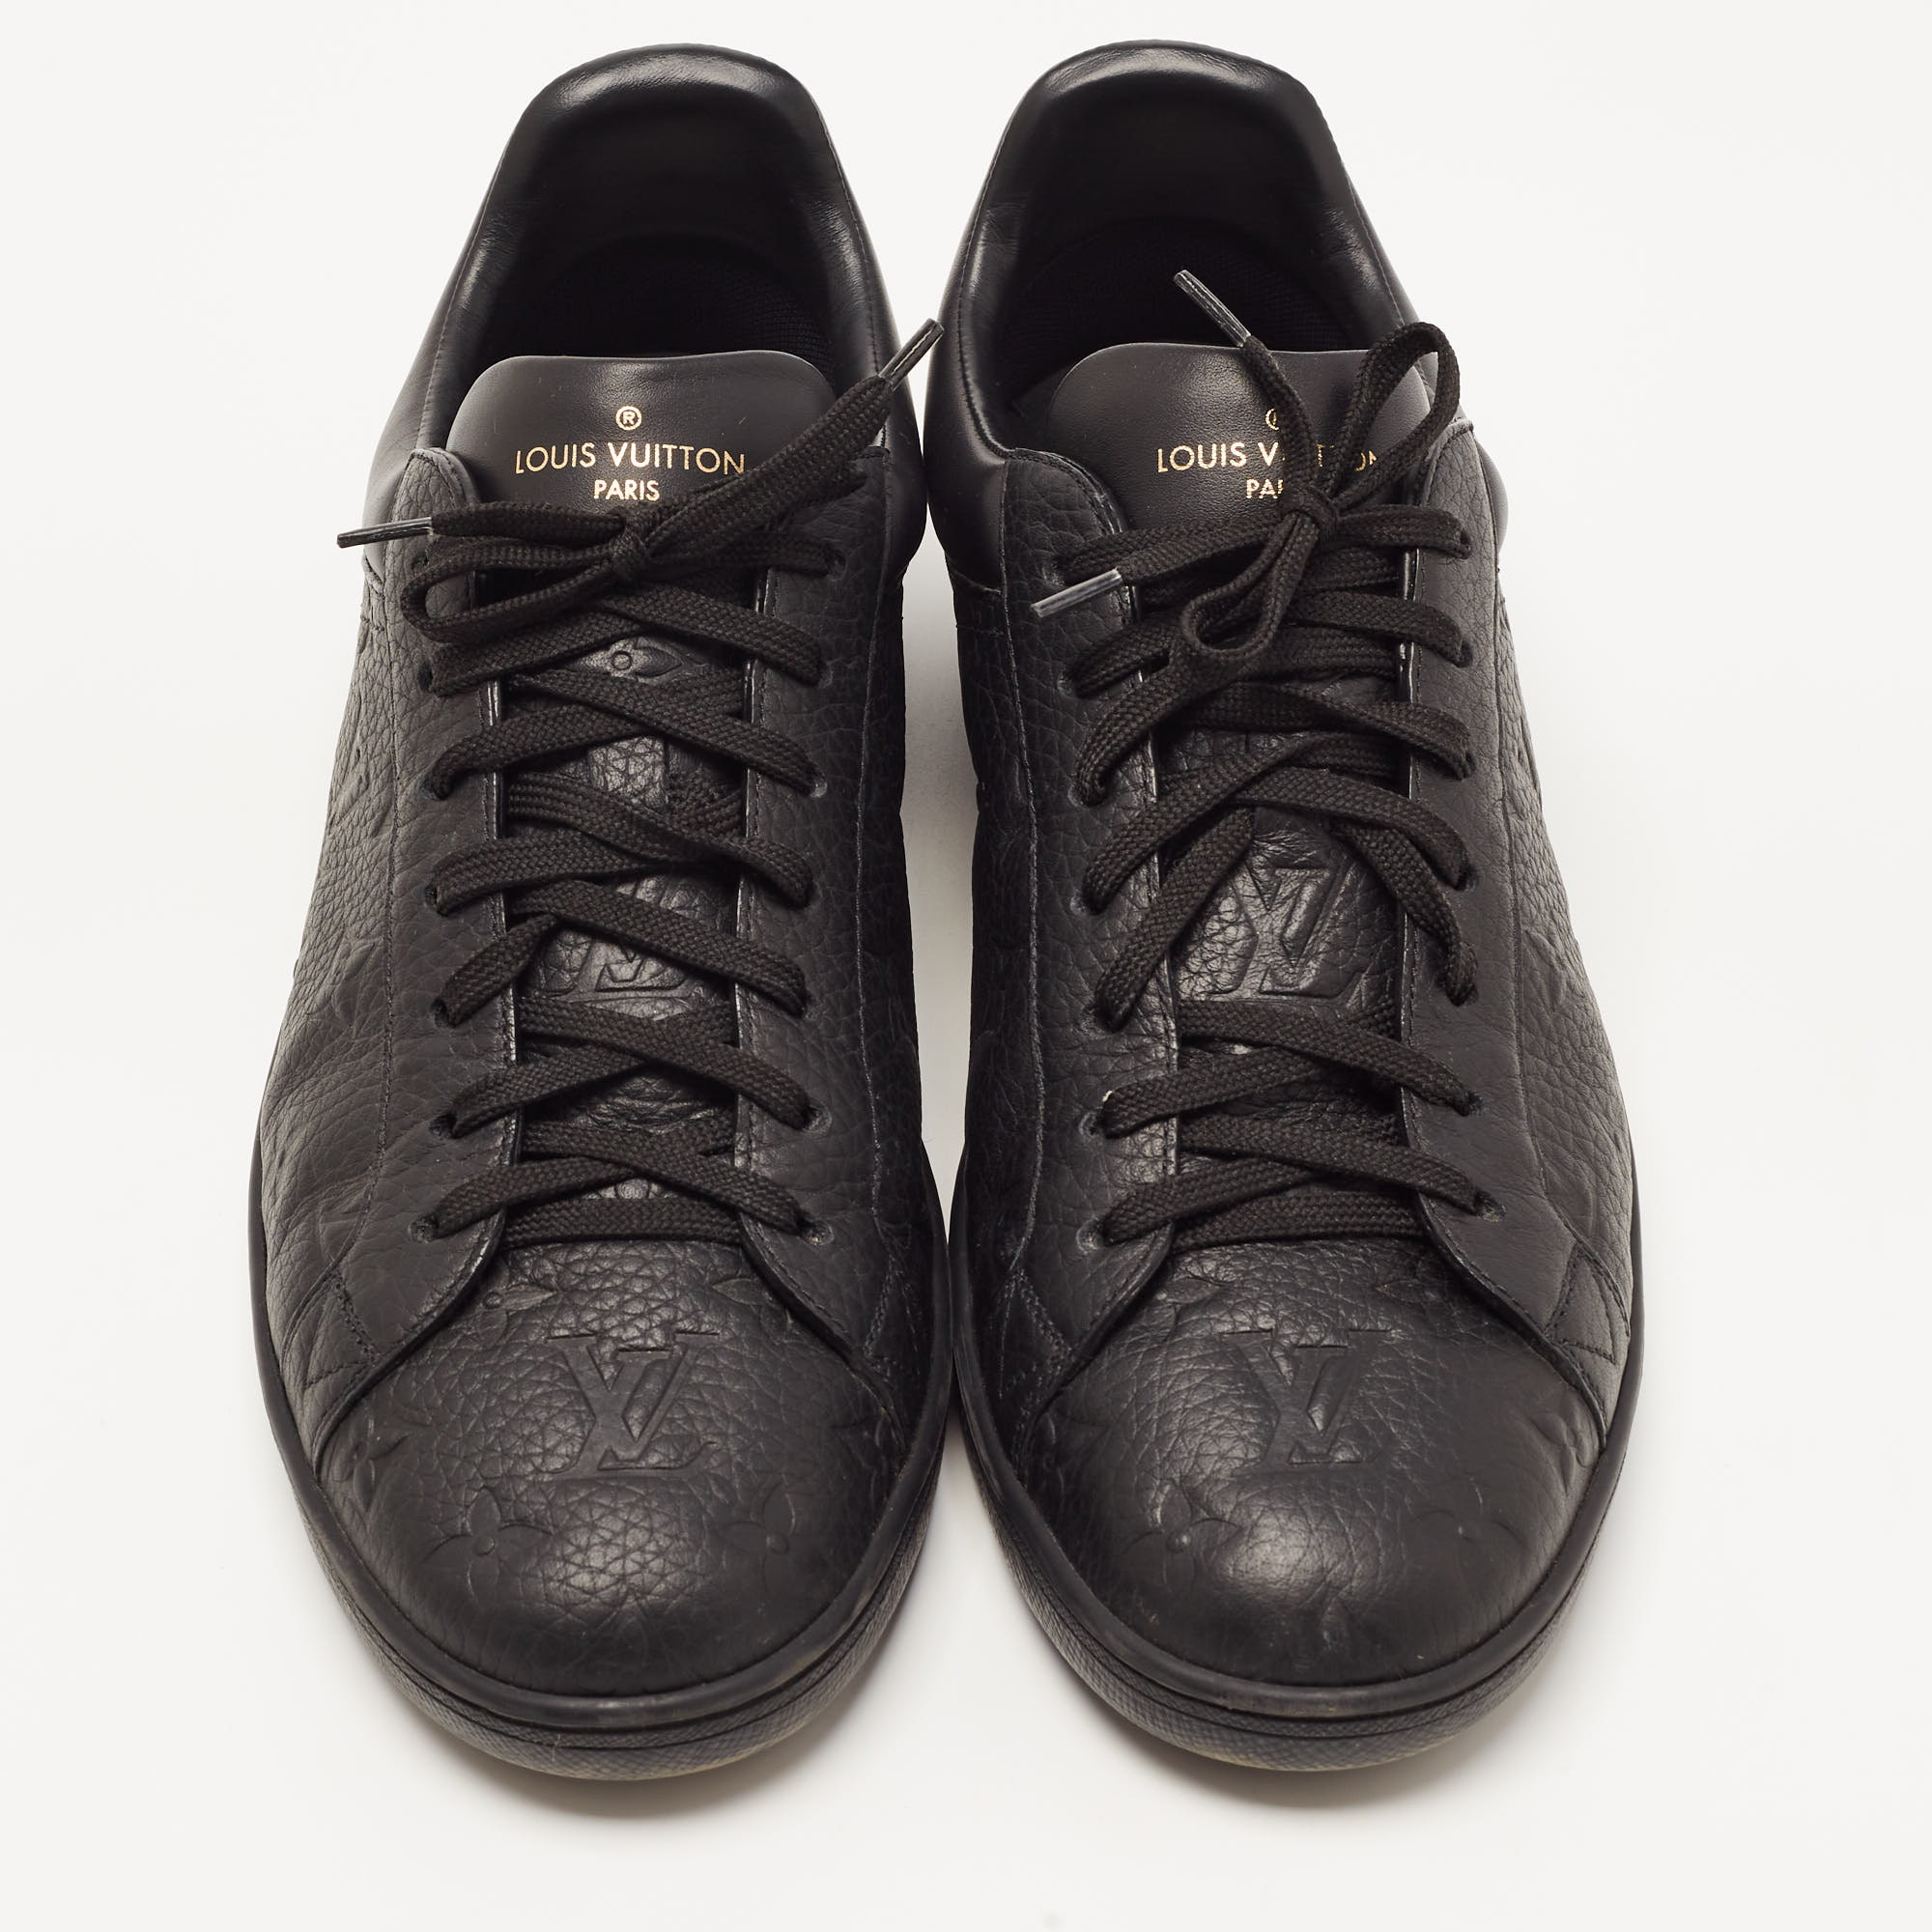 Louis Vuitton Black Monogram Leather Luxembourg Sneakers Size 43